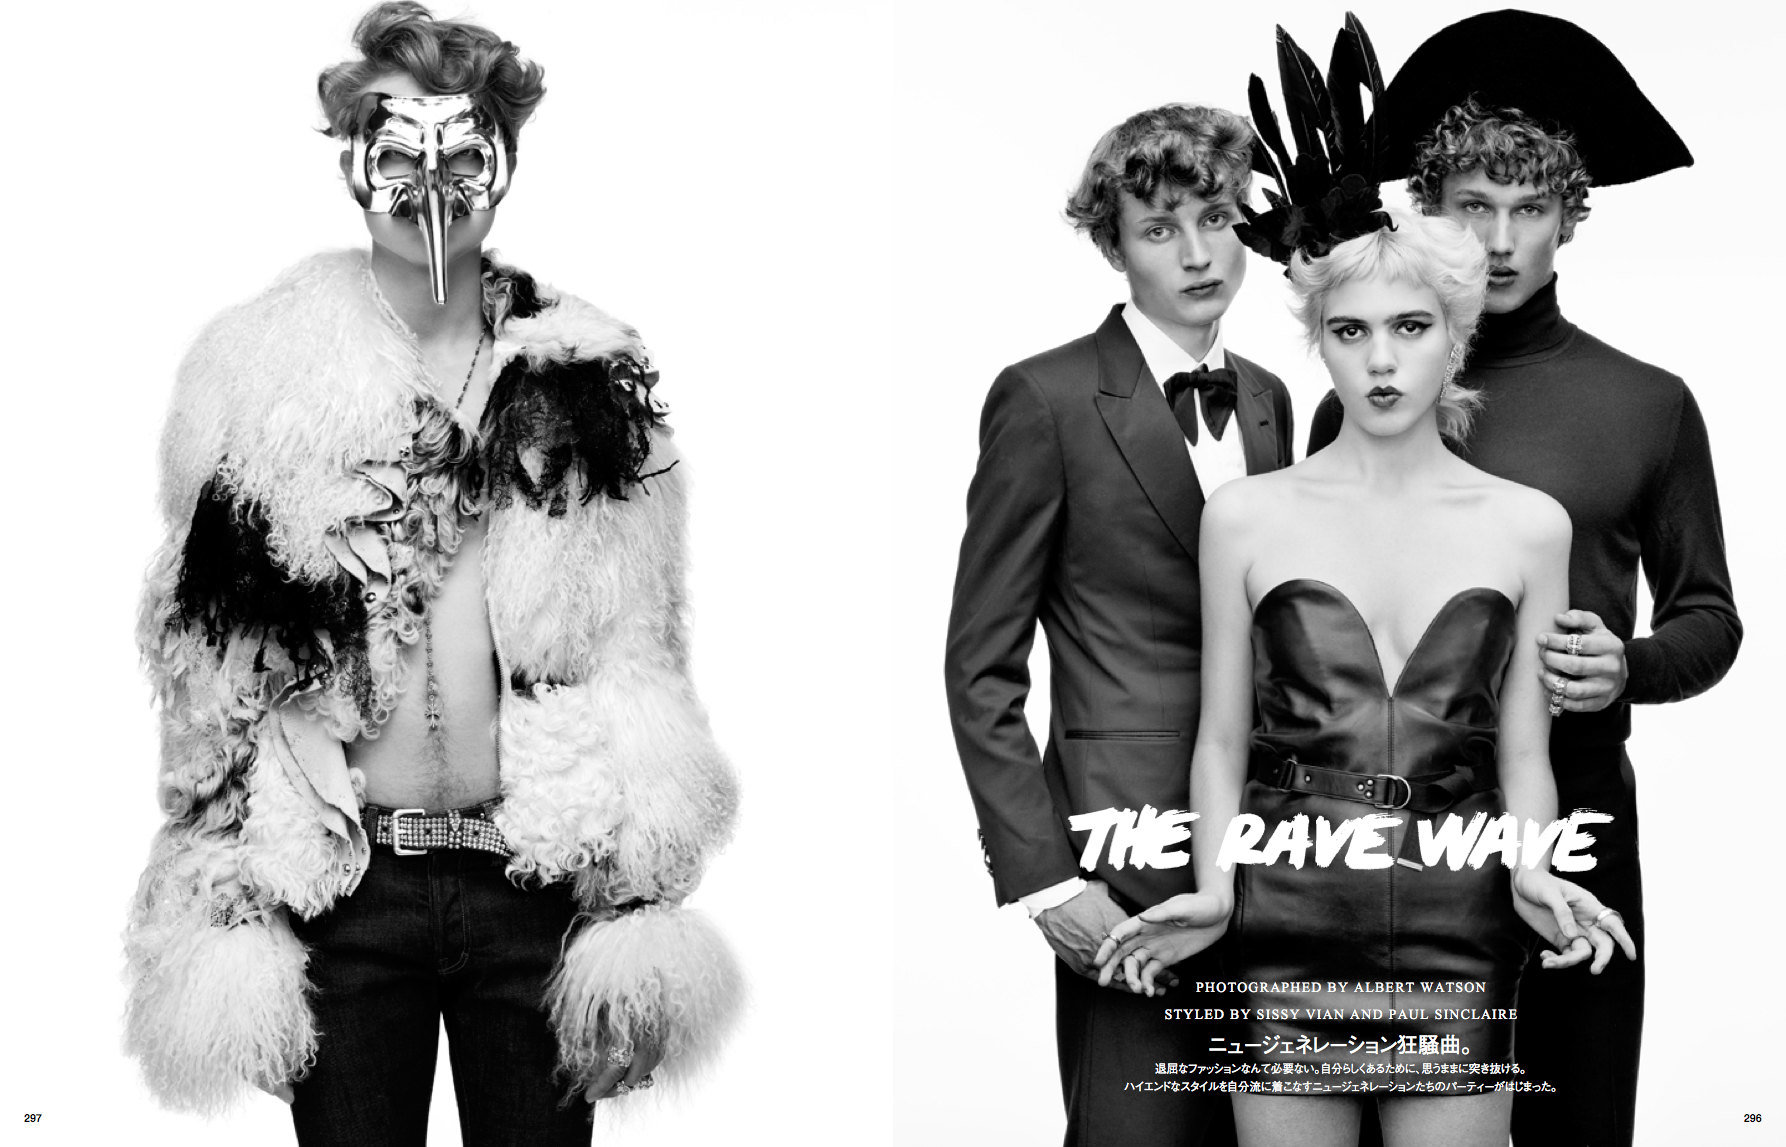 JAKIMAC featured in VOGUE Japan's THE RAVE WAVE